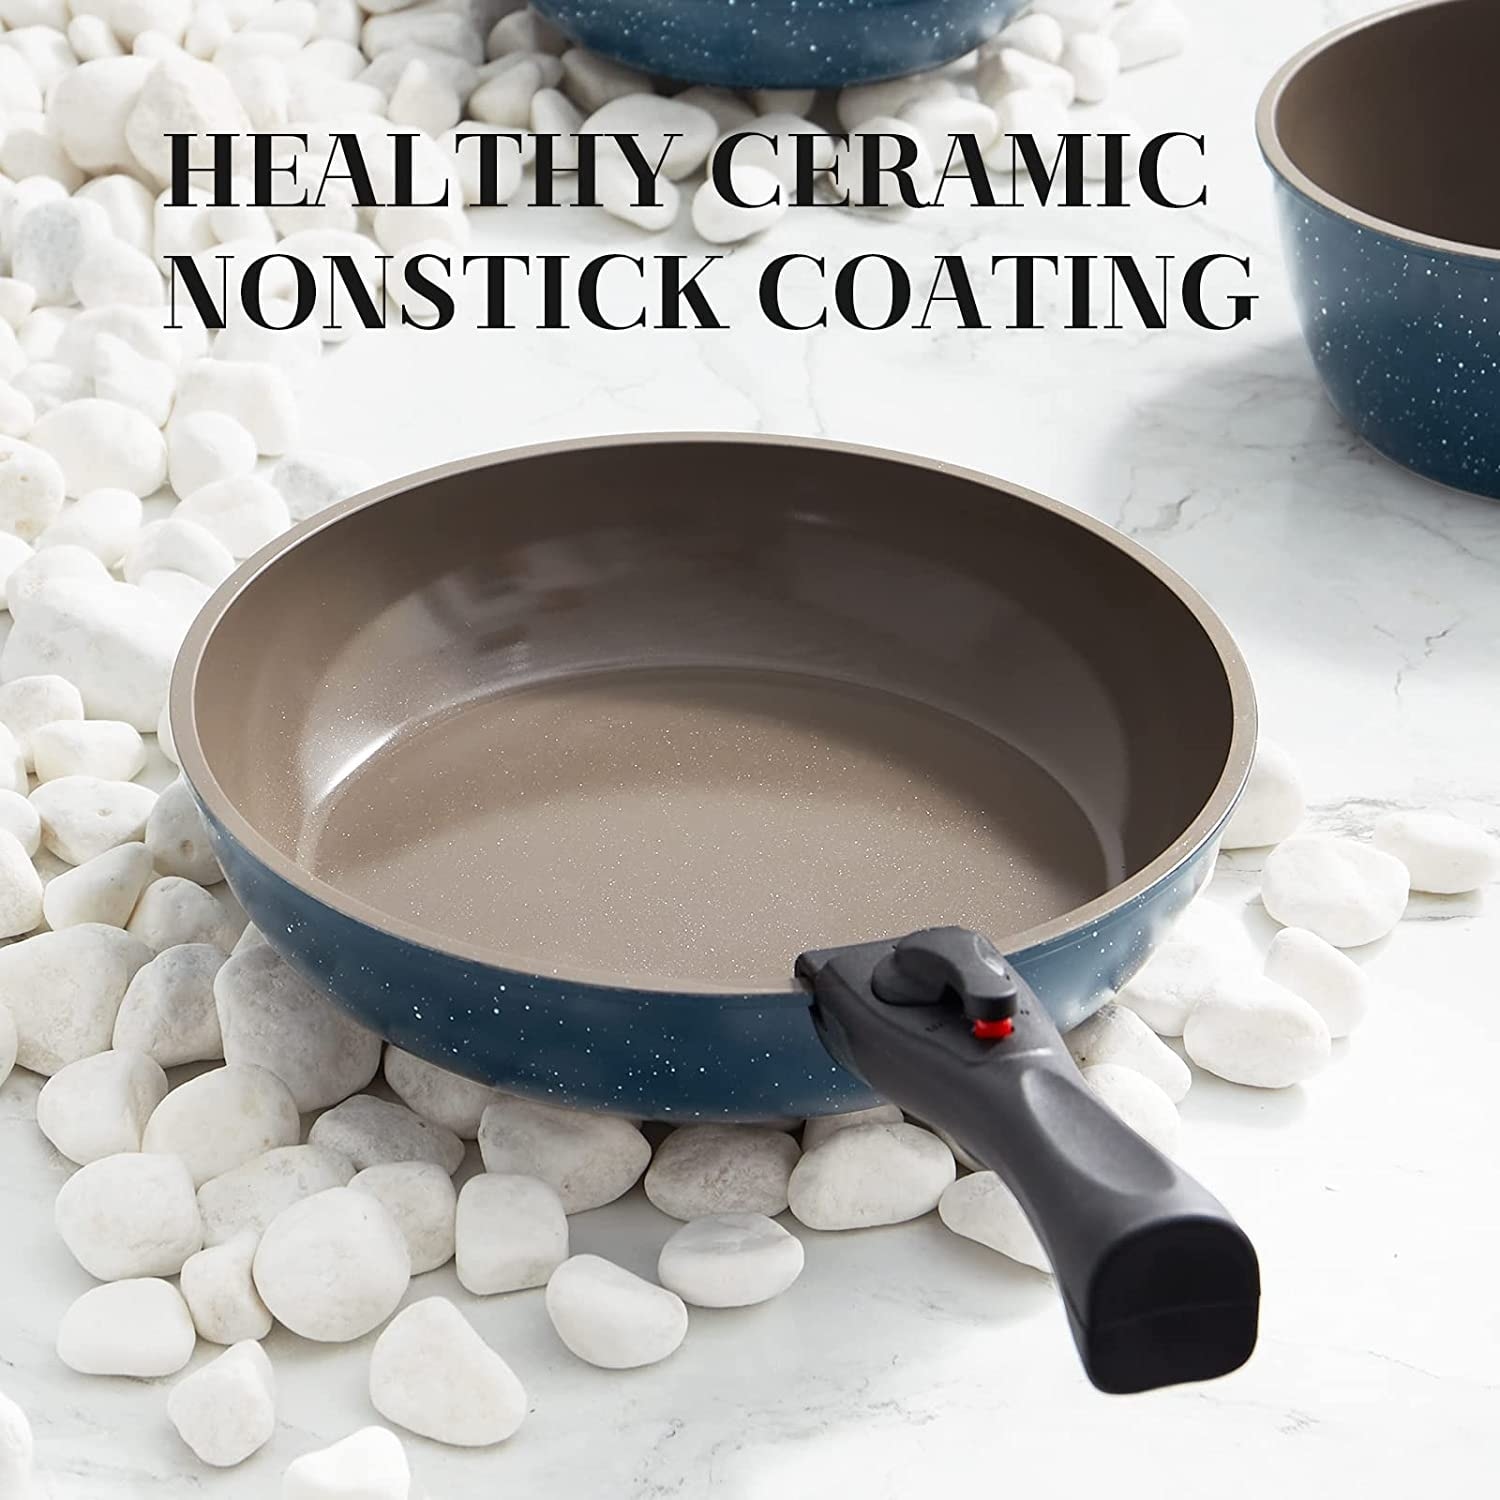 https://ak1.ostkcdn.com/images/products/is/images/direct/5bb37c0a9f616ba002fc2ca1d6d2f37639324e82/Pots-and-Pans-Set%2C-7Pcs-Ceramic-Nonstick-Cookware-Set%2C-Removable-Handle%2C-Suitble-for-Camping%2C-RV%2C-Inducton.jpg